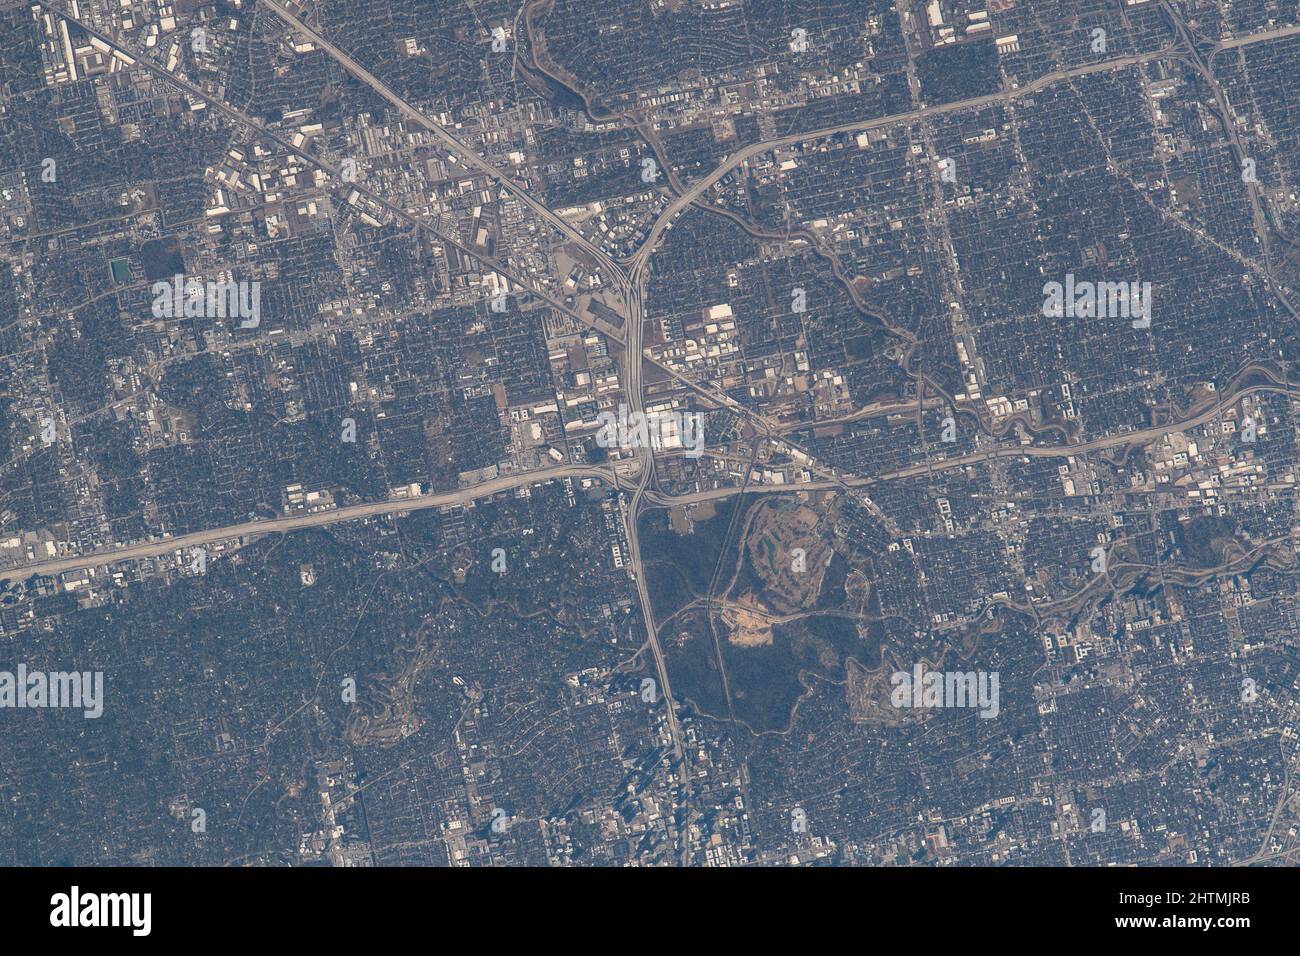 International Space Station, EARTH ORBIT. 13 February, 2022. The northwest corner of Houston, Texas, with the major highways of Interstate 610 looping around the city, Interstate 10 moving east to west, and U.S. 290 heading northwest, are pictured from the International Space Station as it orbited 258 miles above the Lone Star state, February 13, 2022 from Earth Orbit. Stock Photo